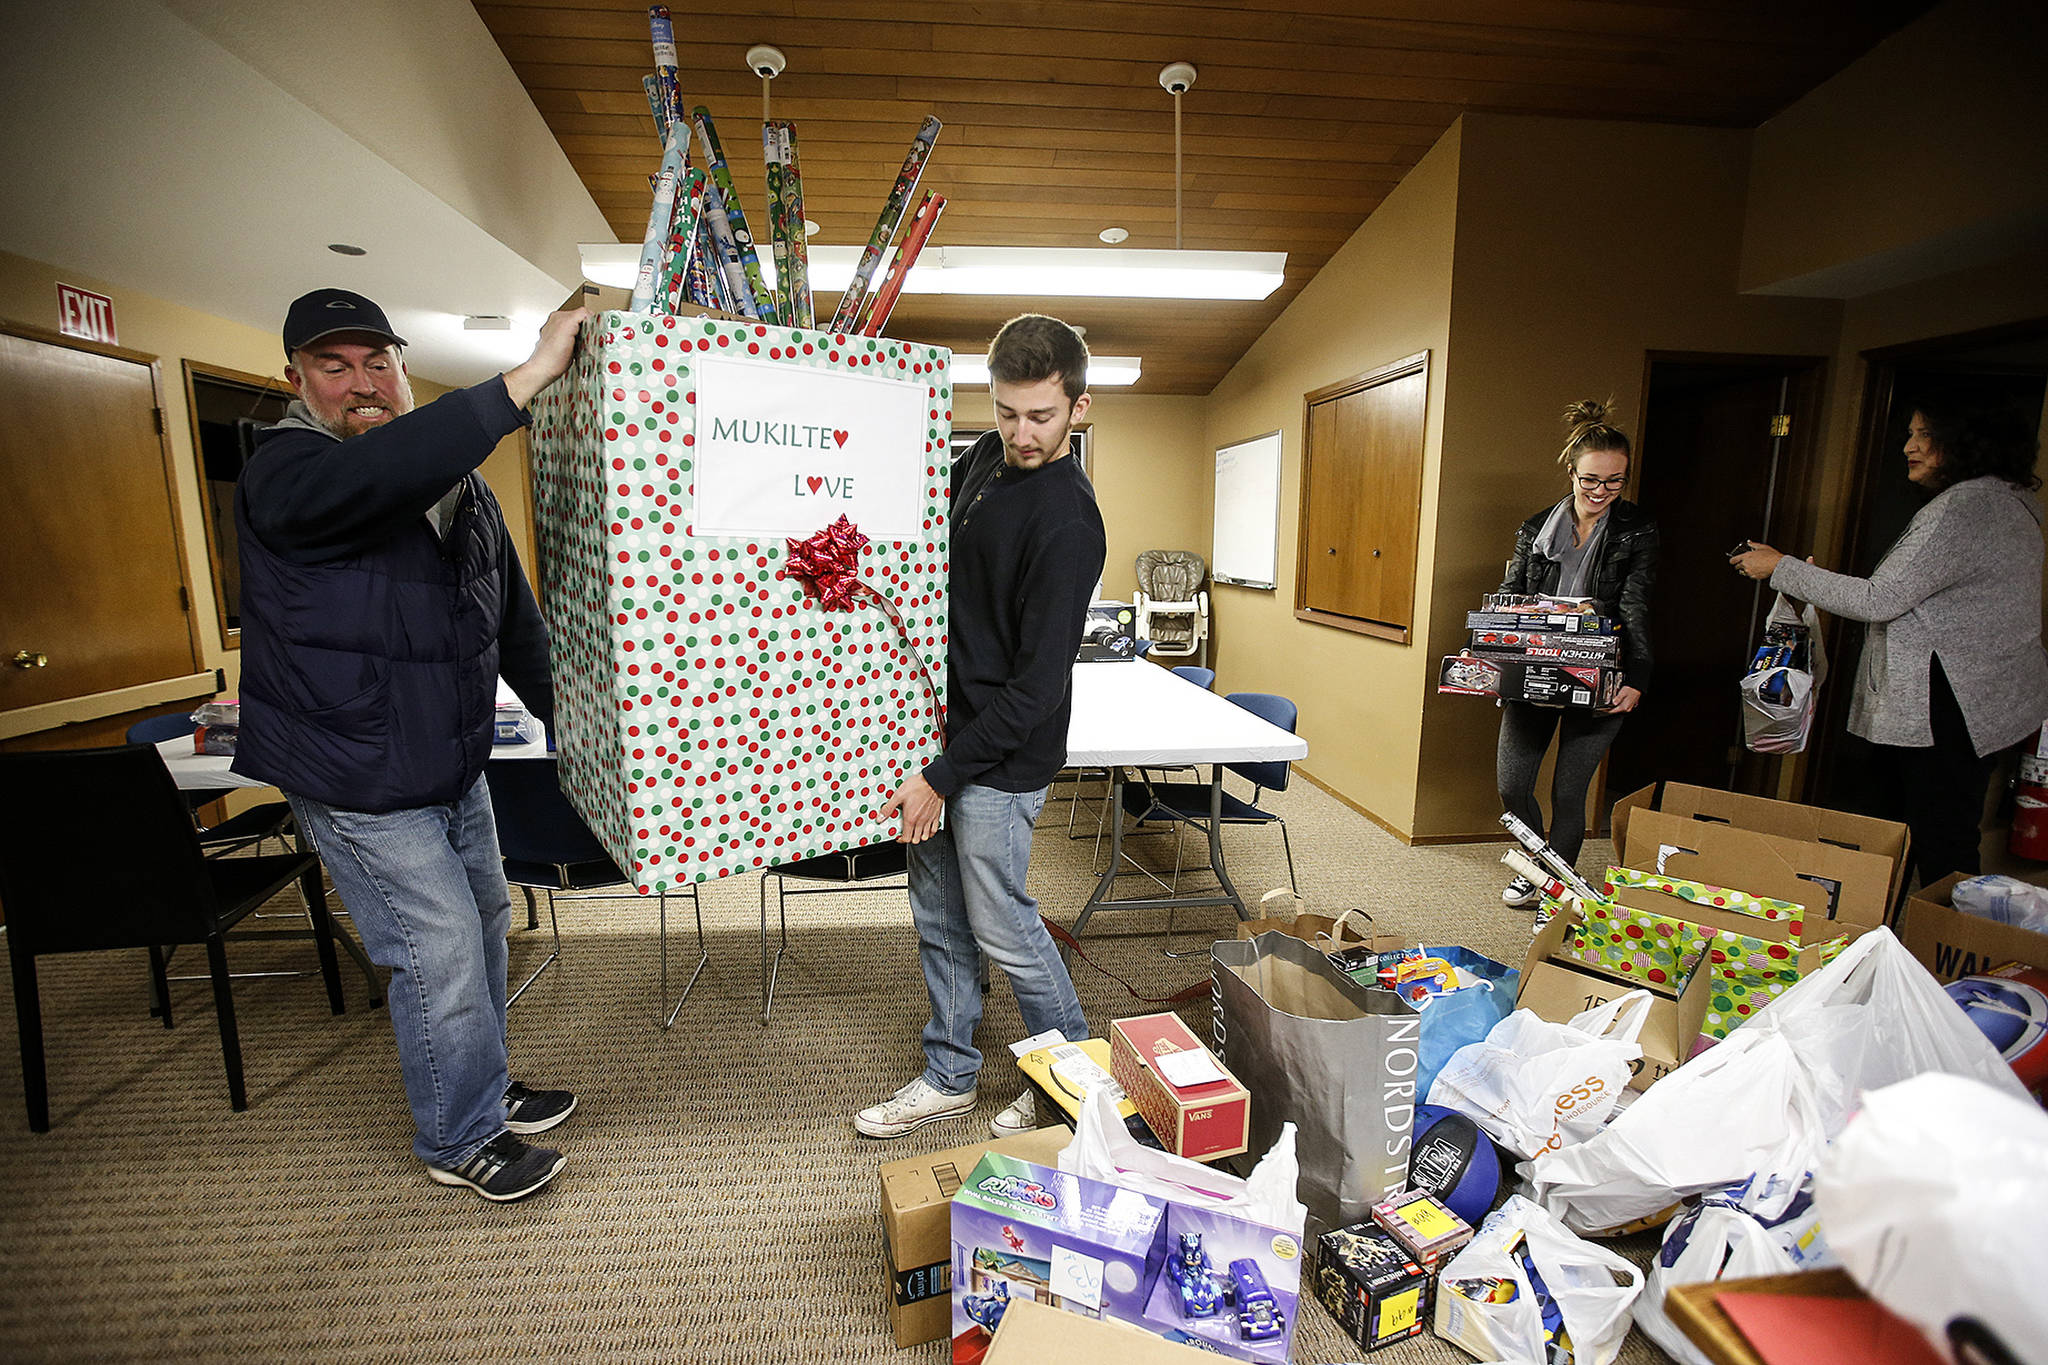 Jason Swift (left) carries a box full of donated presents with Brandon Wright as fellow volunteers Christina Thomas and Jamie Wright help organize other gifts at the Mukilteo Chamber of Commerce building on Tuesday, Dec. 19. The program, Mukilteo Love, was started by Shana Swift and is expected to help provide gifts to over 60 local children in need this holiday season. (Ian Terry / The Herald)